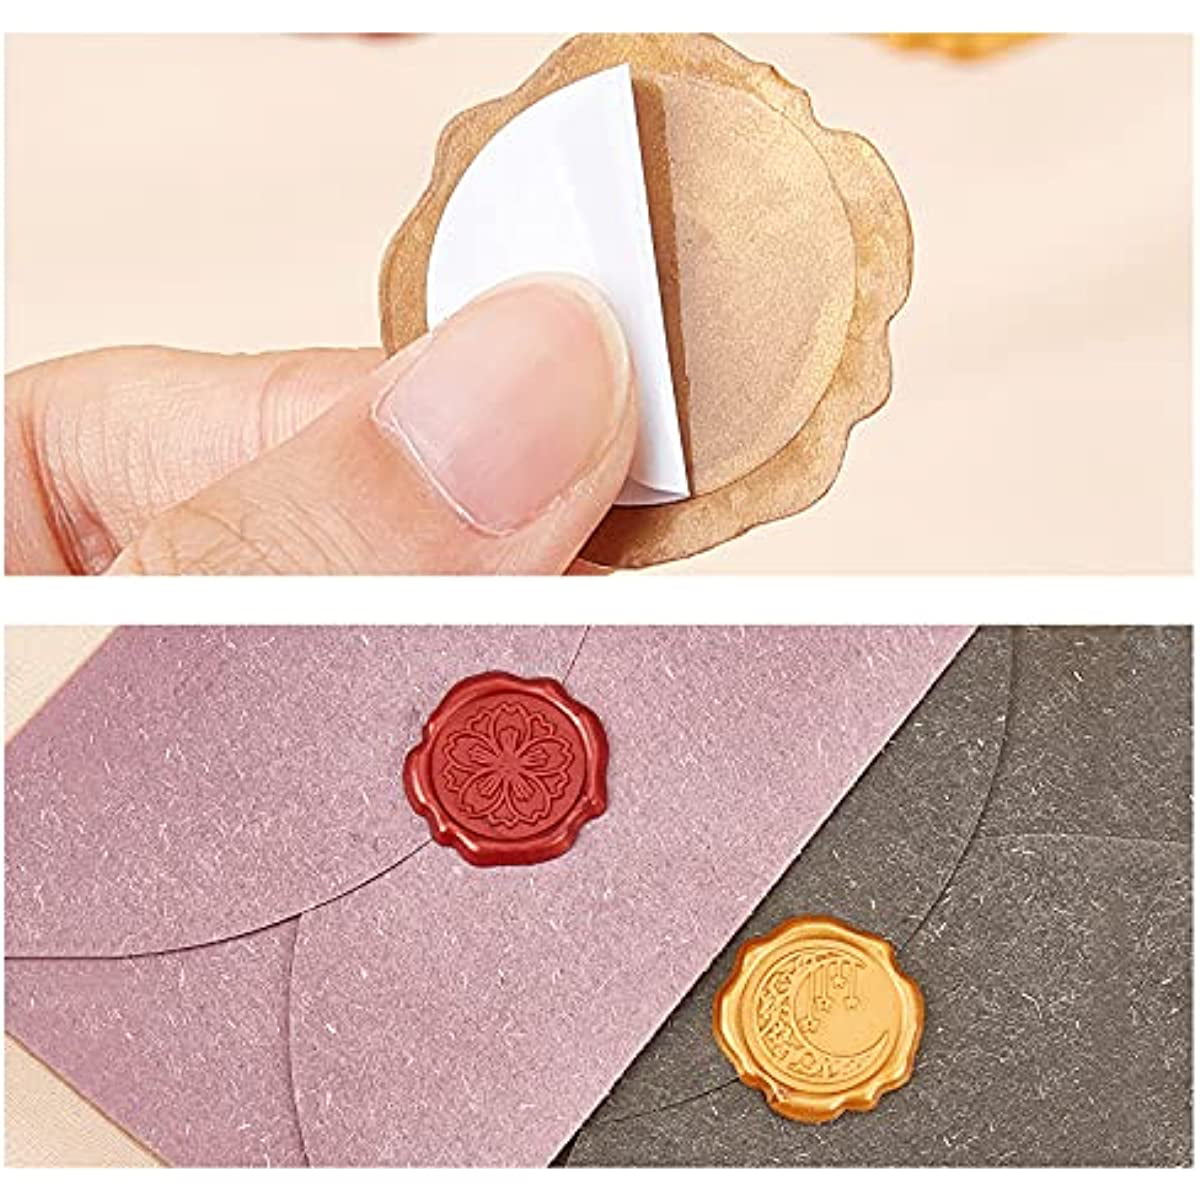  108pcs Wax Seal Sticker, Invitation Envelope Seal Stickers  Wedding Stickers for Envelopes Colorful Envelope Seal Stickers fits Wedding  Graduation Envelope self Adhesive Sticker : Office Products